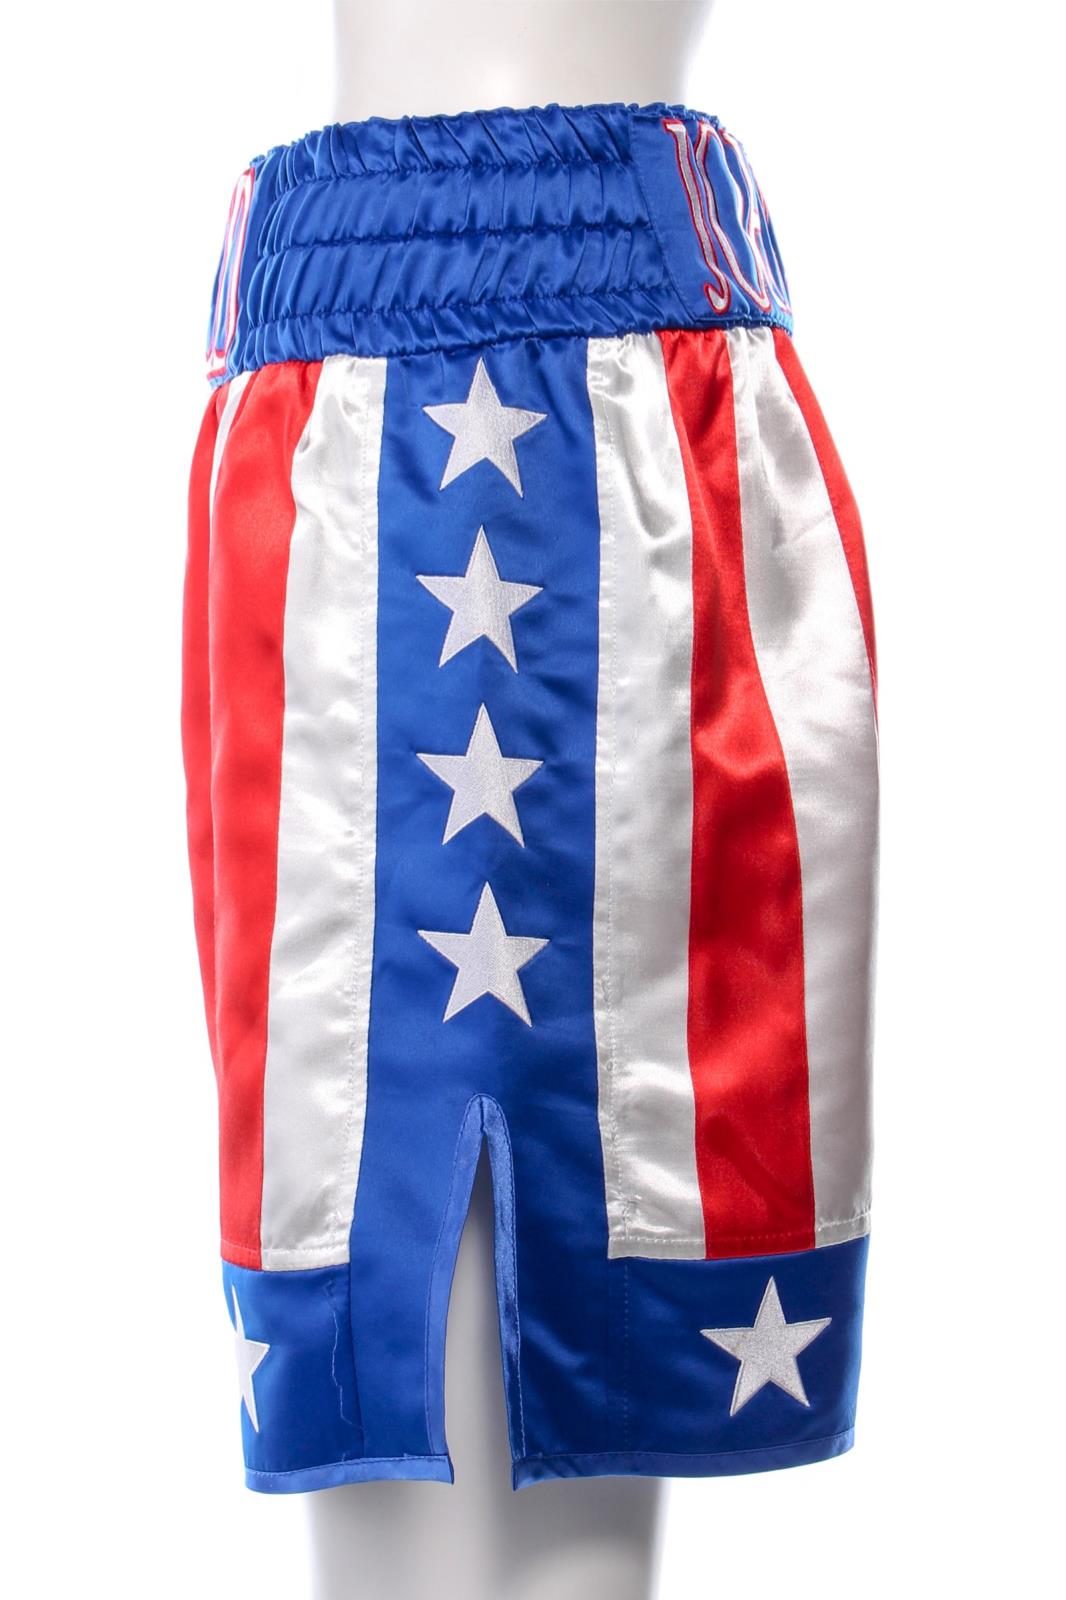 Creed 2 Adonis Creed Screen Worn Stunt Double Boxing Shorts & Shoes Ch ...